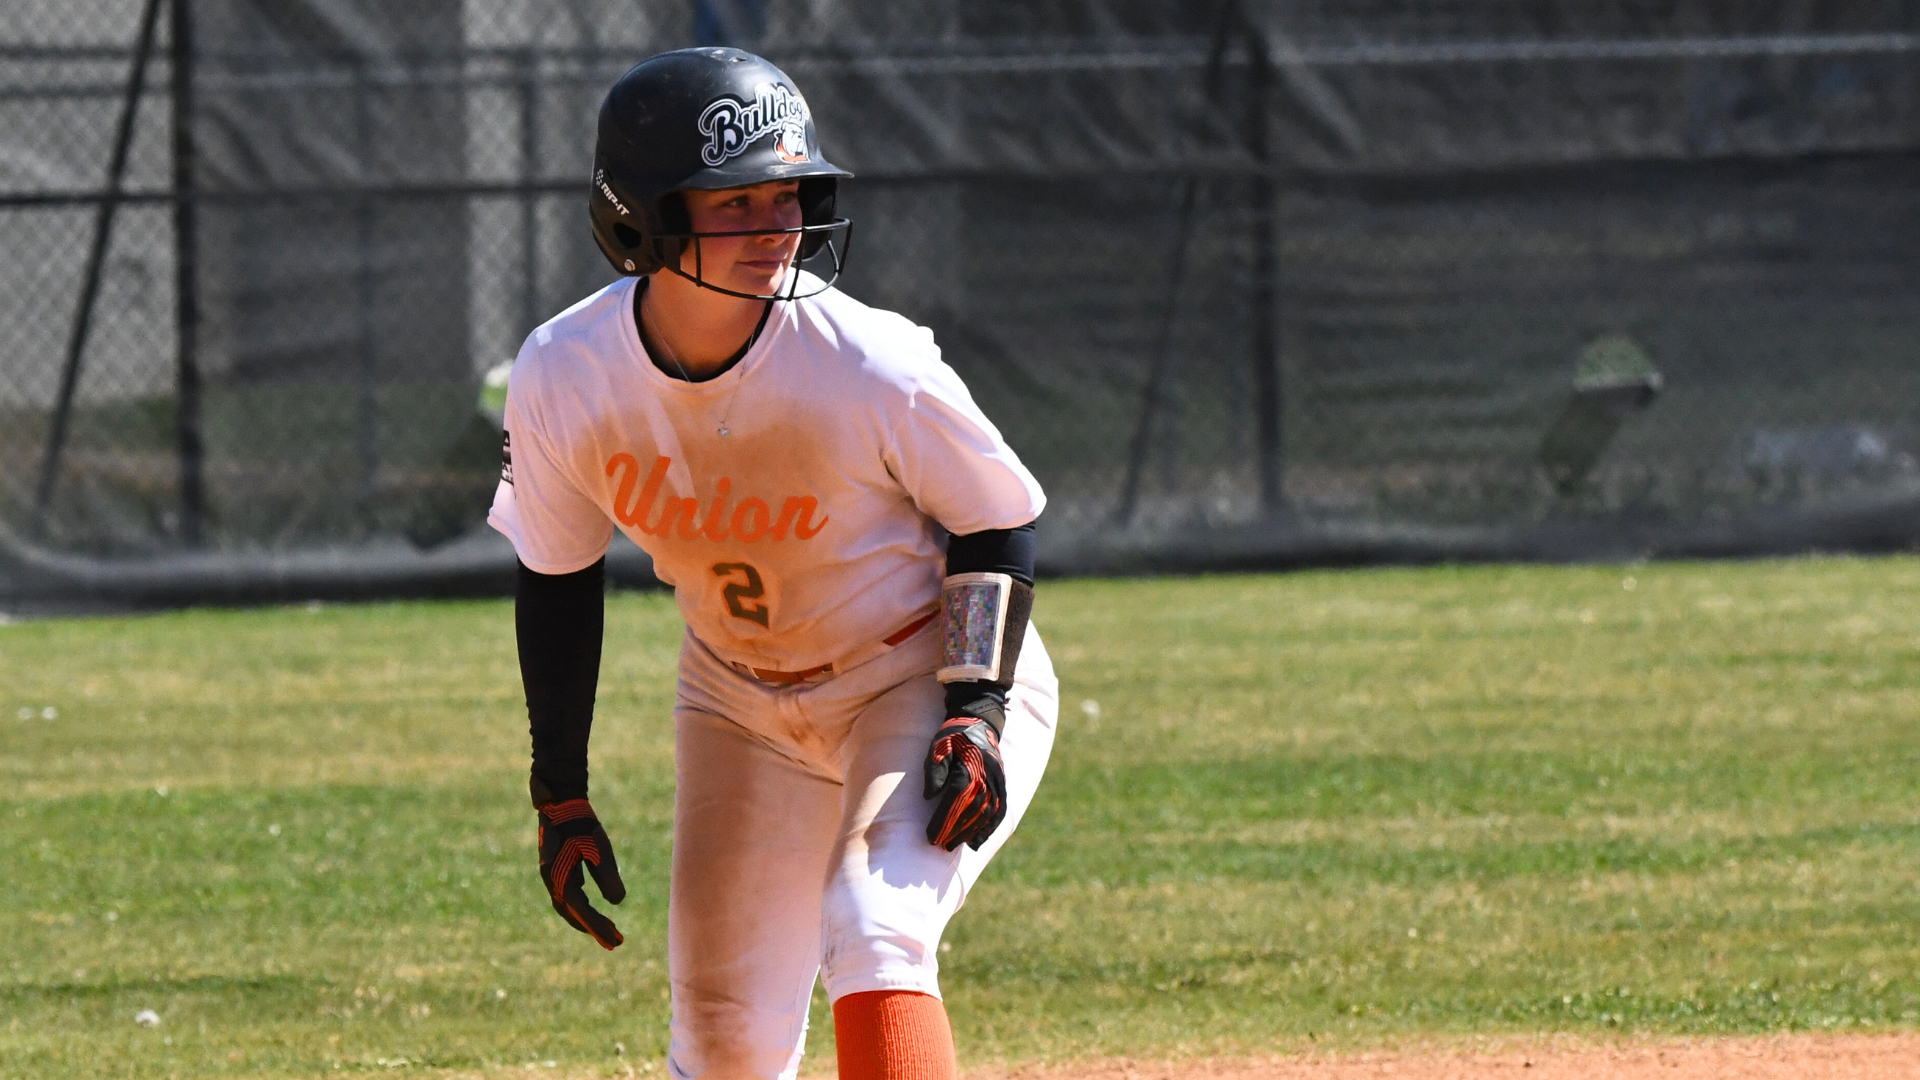 Union falls in doubleheader at CIU